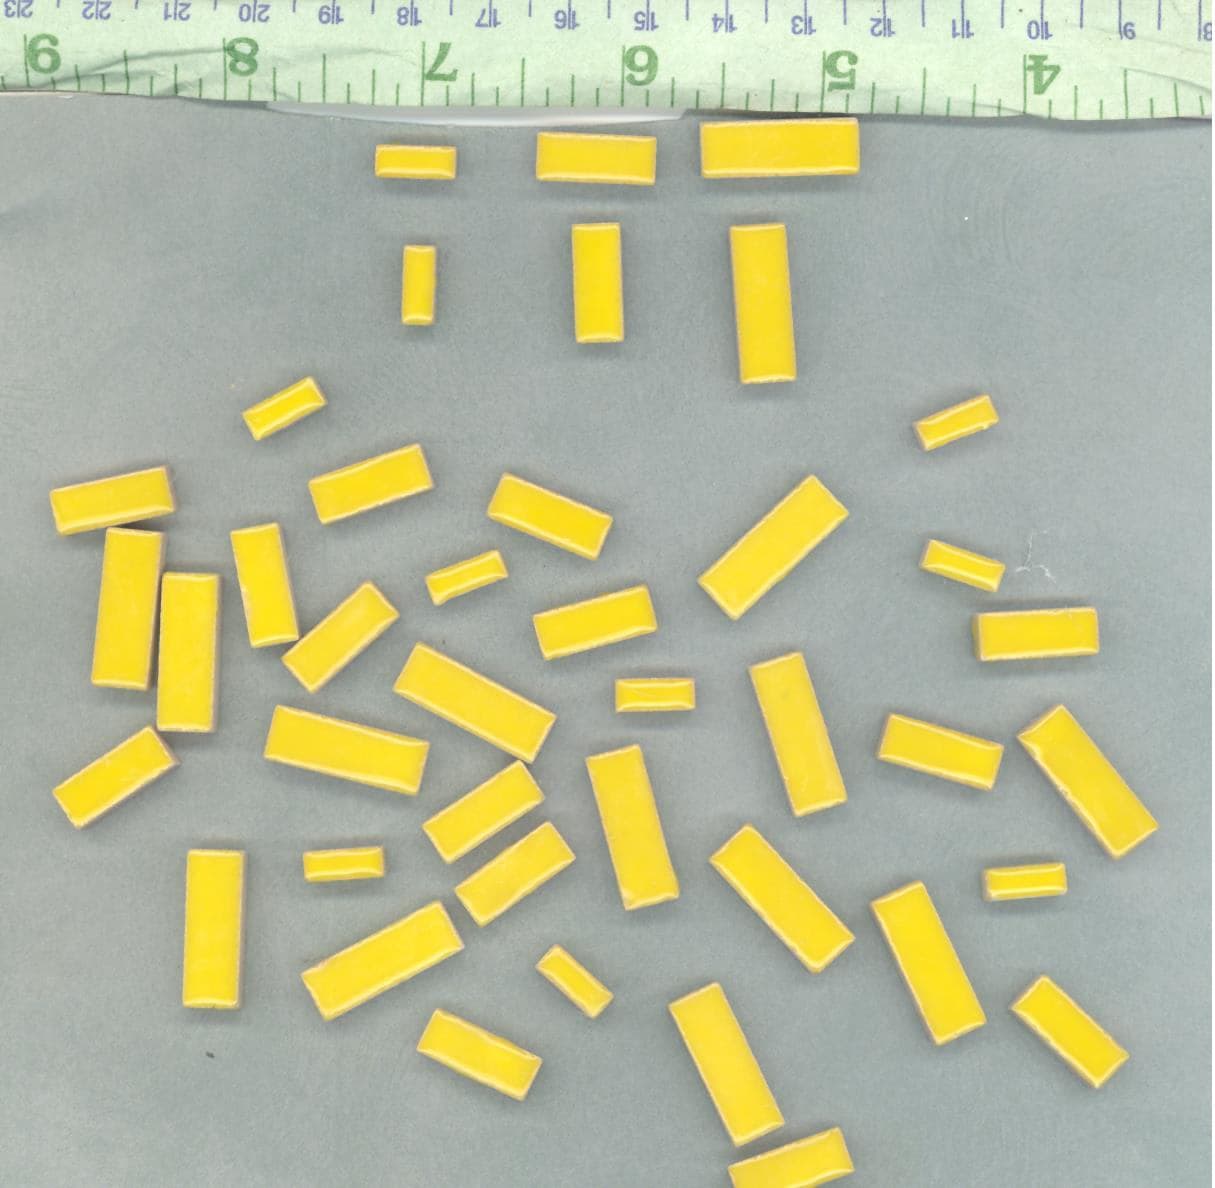 Lemon Yellow Mini Rectangles Mosaic Tiles - 50g Ceramic in Mix of 3 Sizes 3/8" and 5/8" and 3/4"